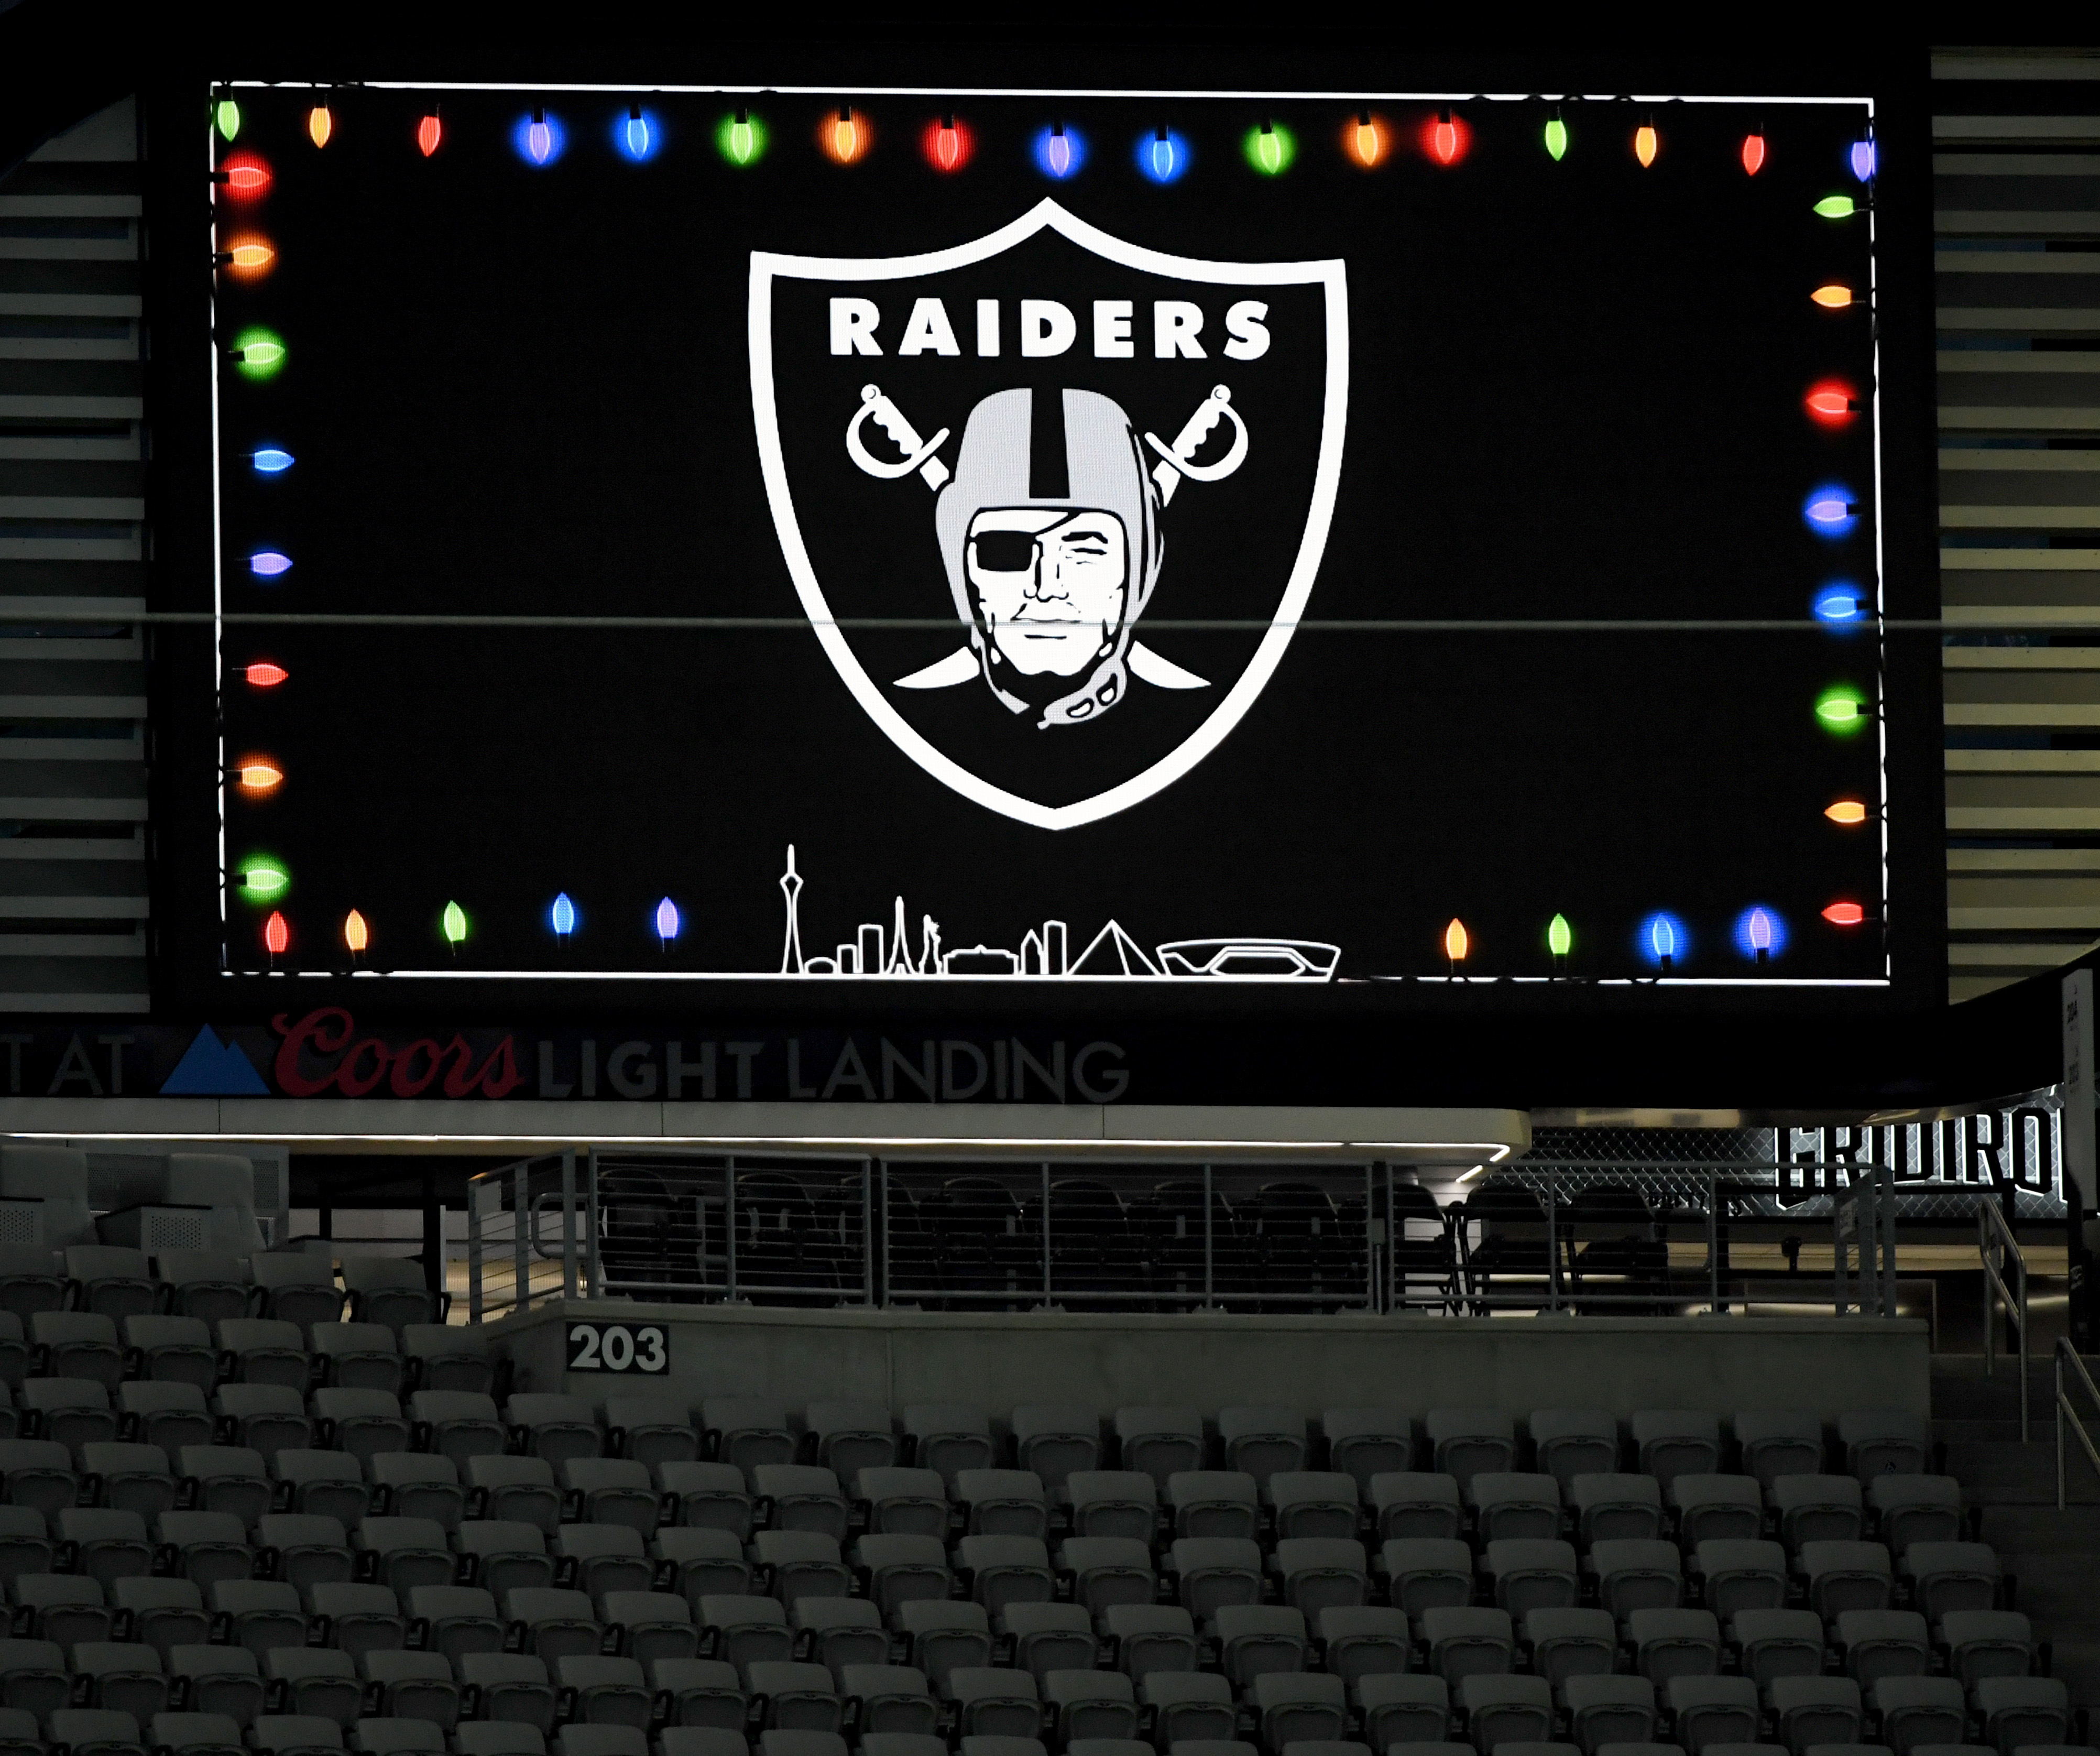 Raiders Reportedly Launch Internal Investigation After Departures of 4 Executive..